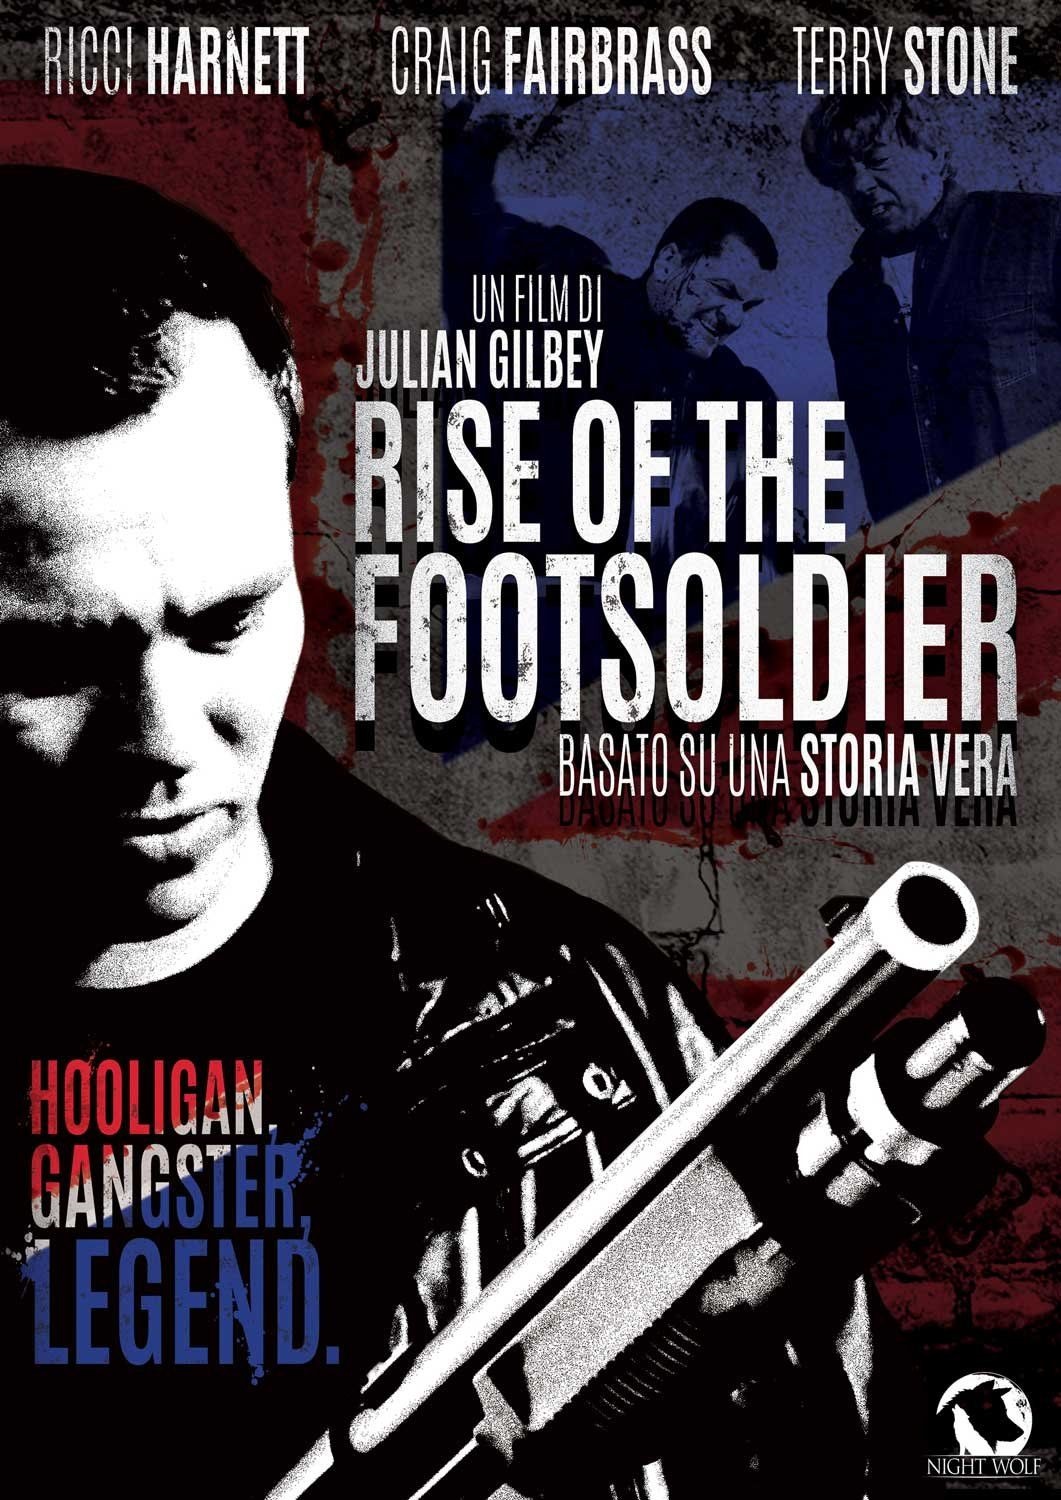 Rise of the Footsoldier [HD] (2007)